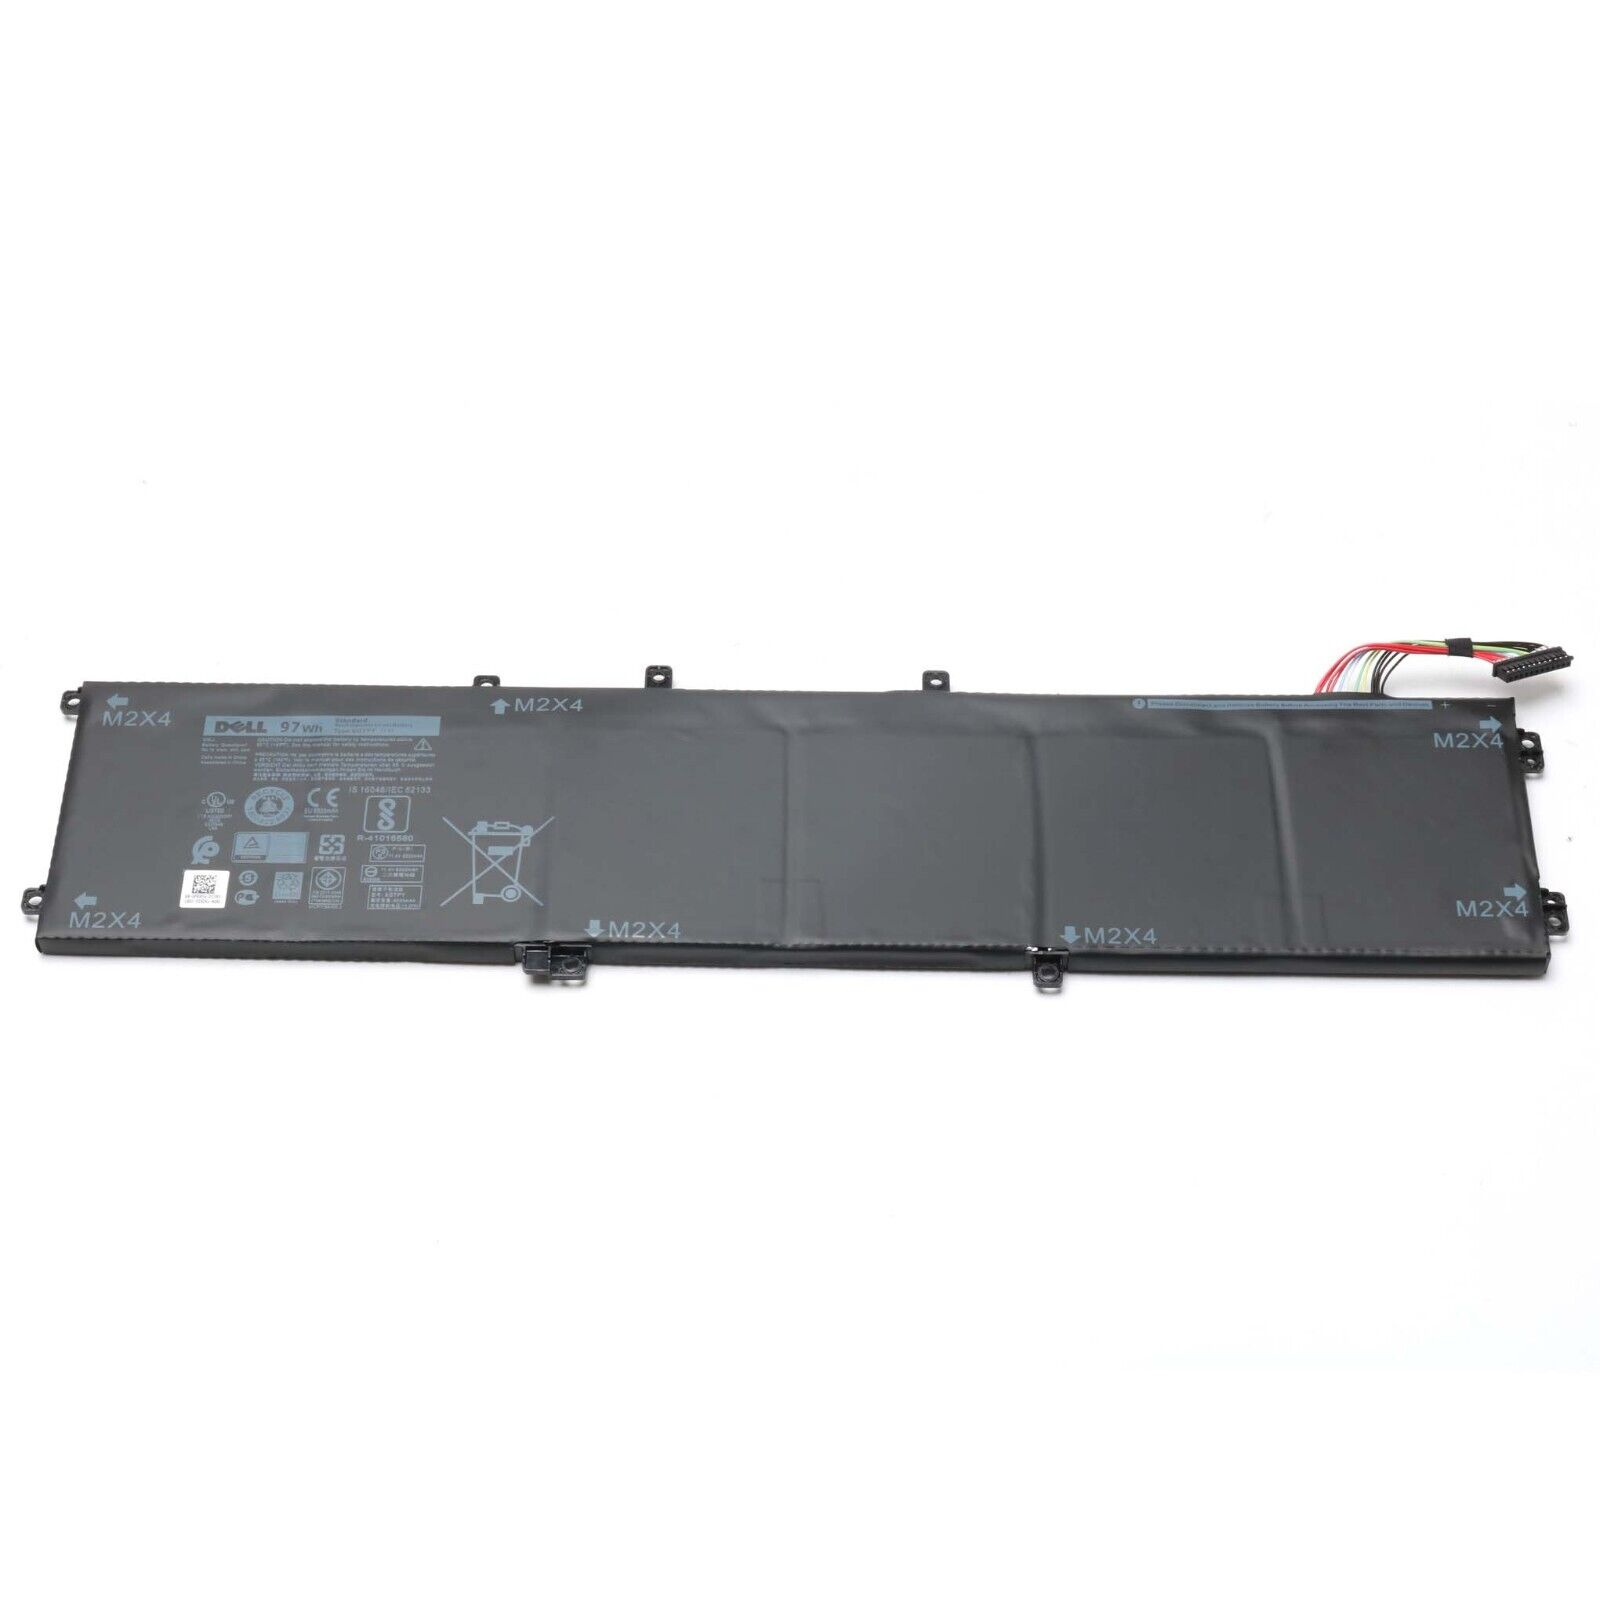 NEW OEM 97WH 6GTPY Battery For DELL Precision M5510 M5520 XPS 15 9550 9560 9570